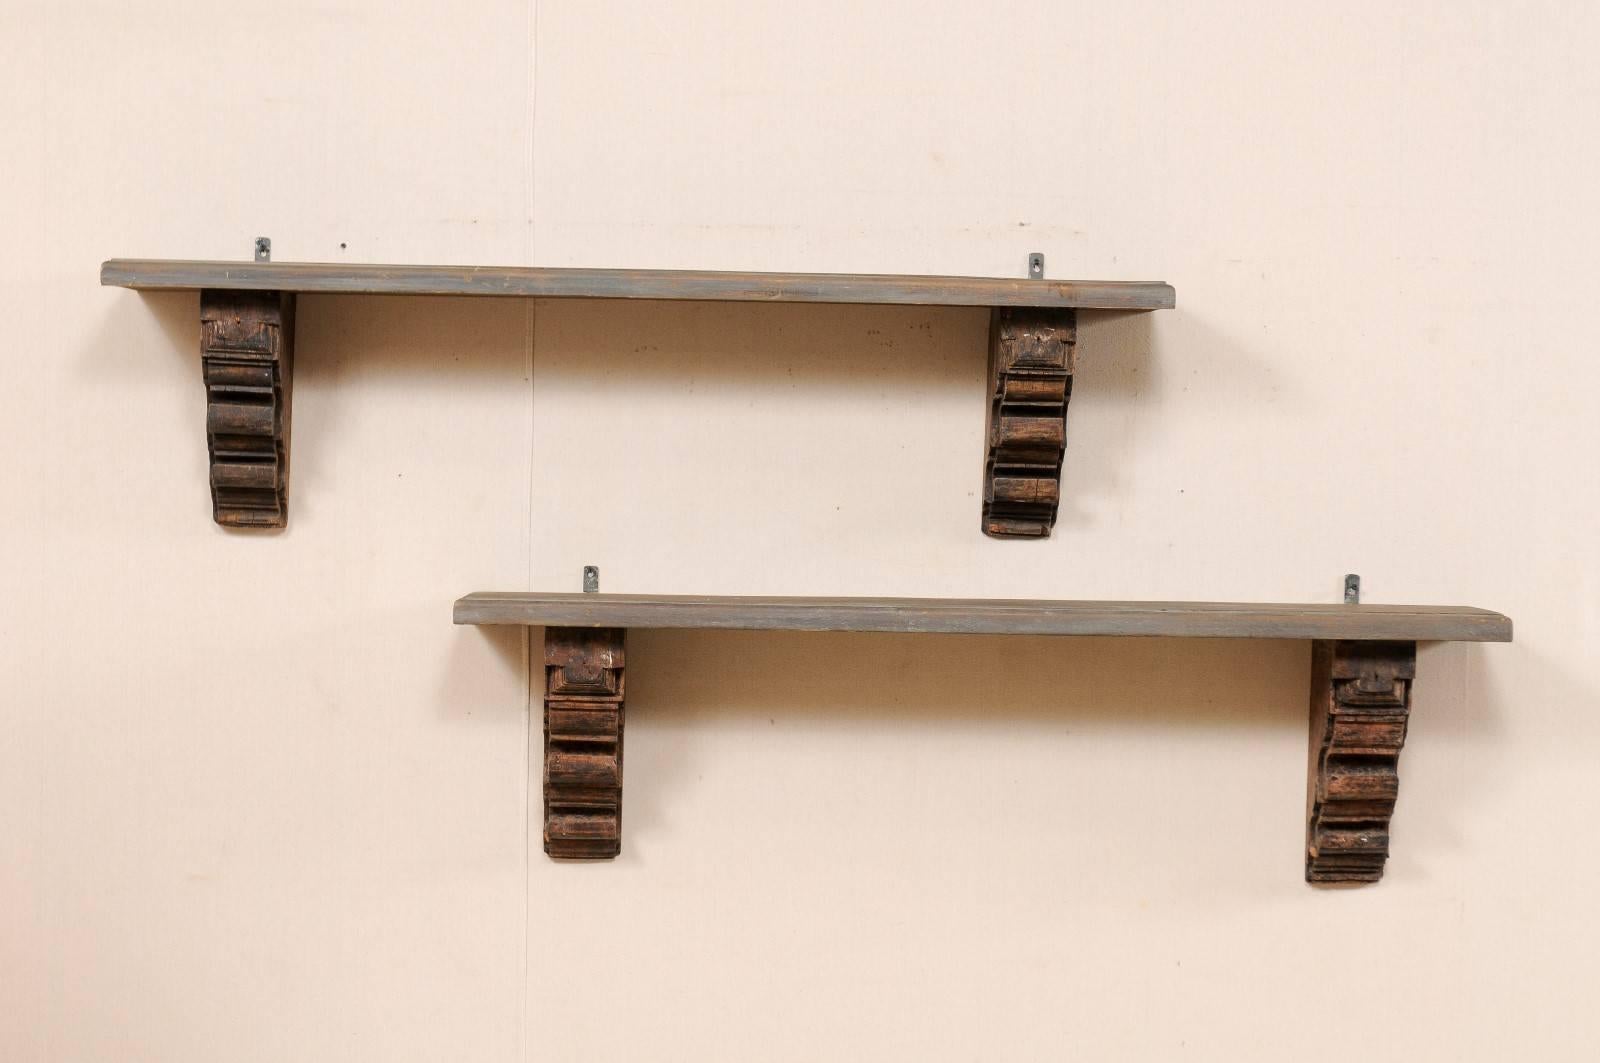 A pair of Italian style wooden shelves fashioned from old carved brackets. This pair of shelves feature beautifully carved brackets, supporting the underside of each shelf on either end. The tops have a charcoal wash over wood grain. These shelves